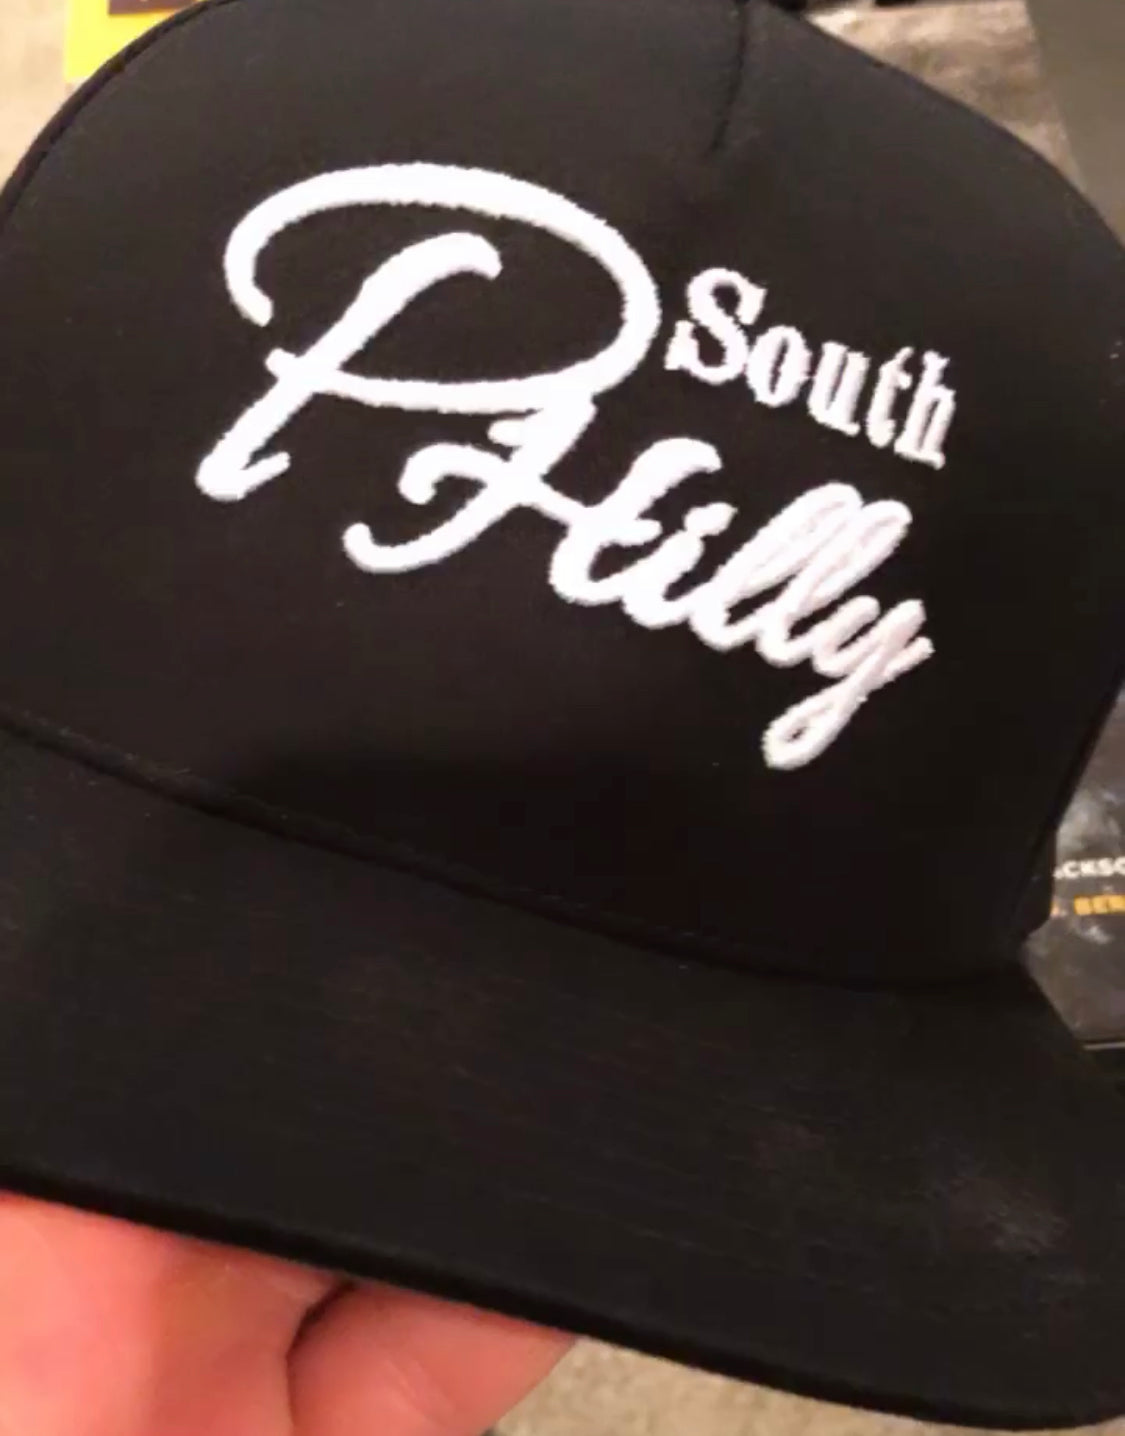 South Philly crown